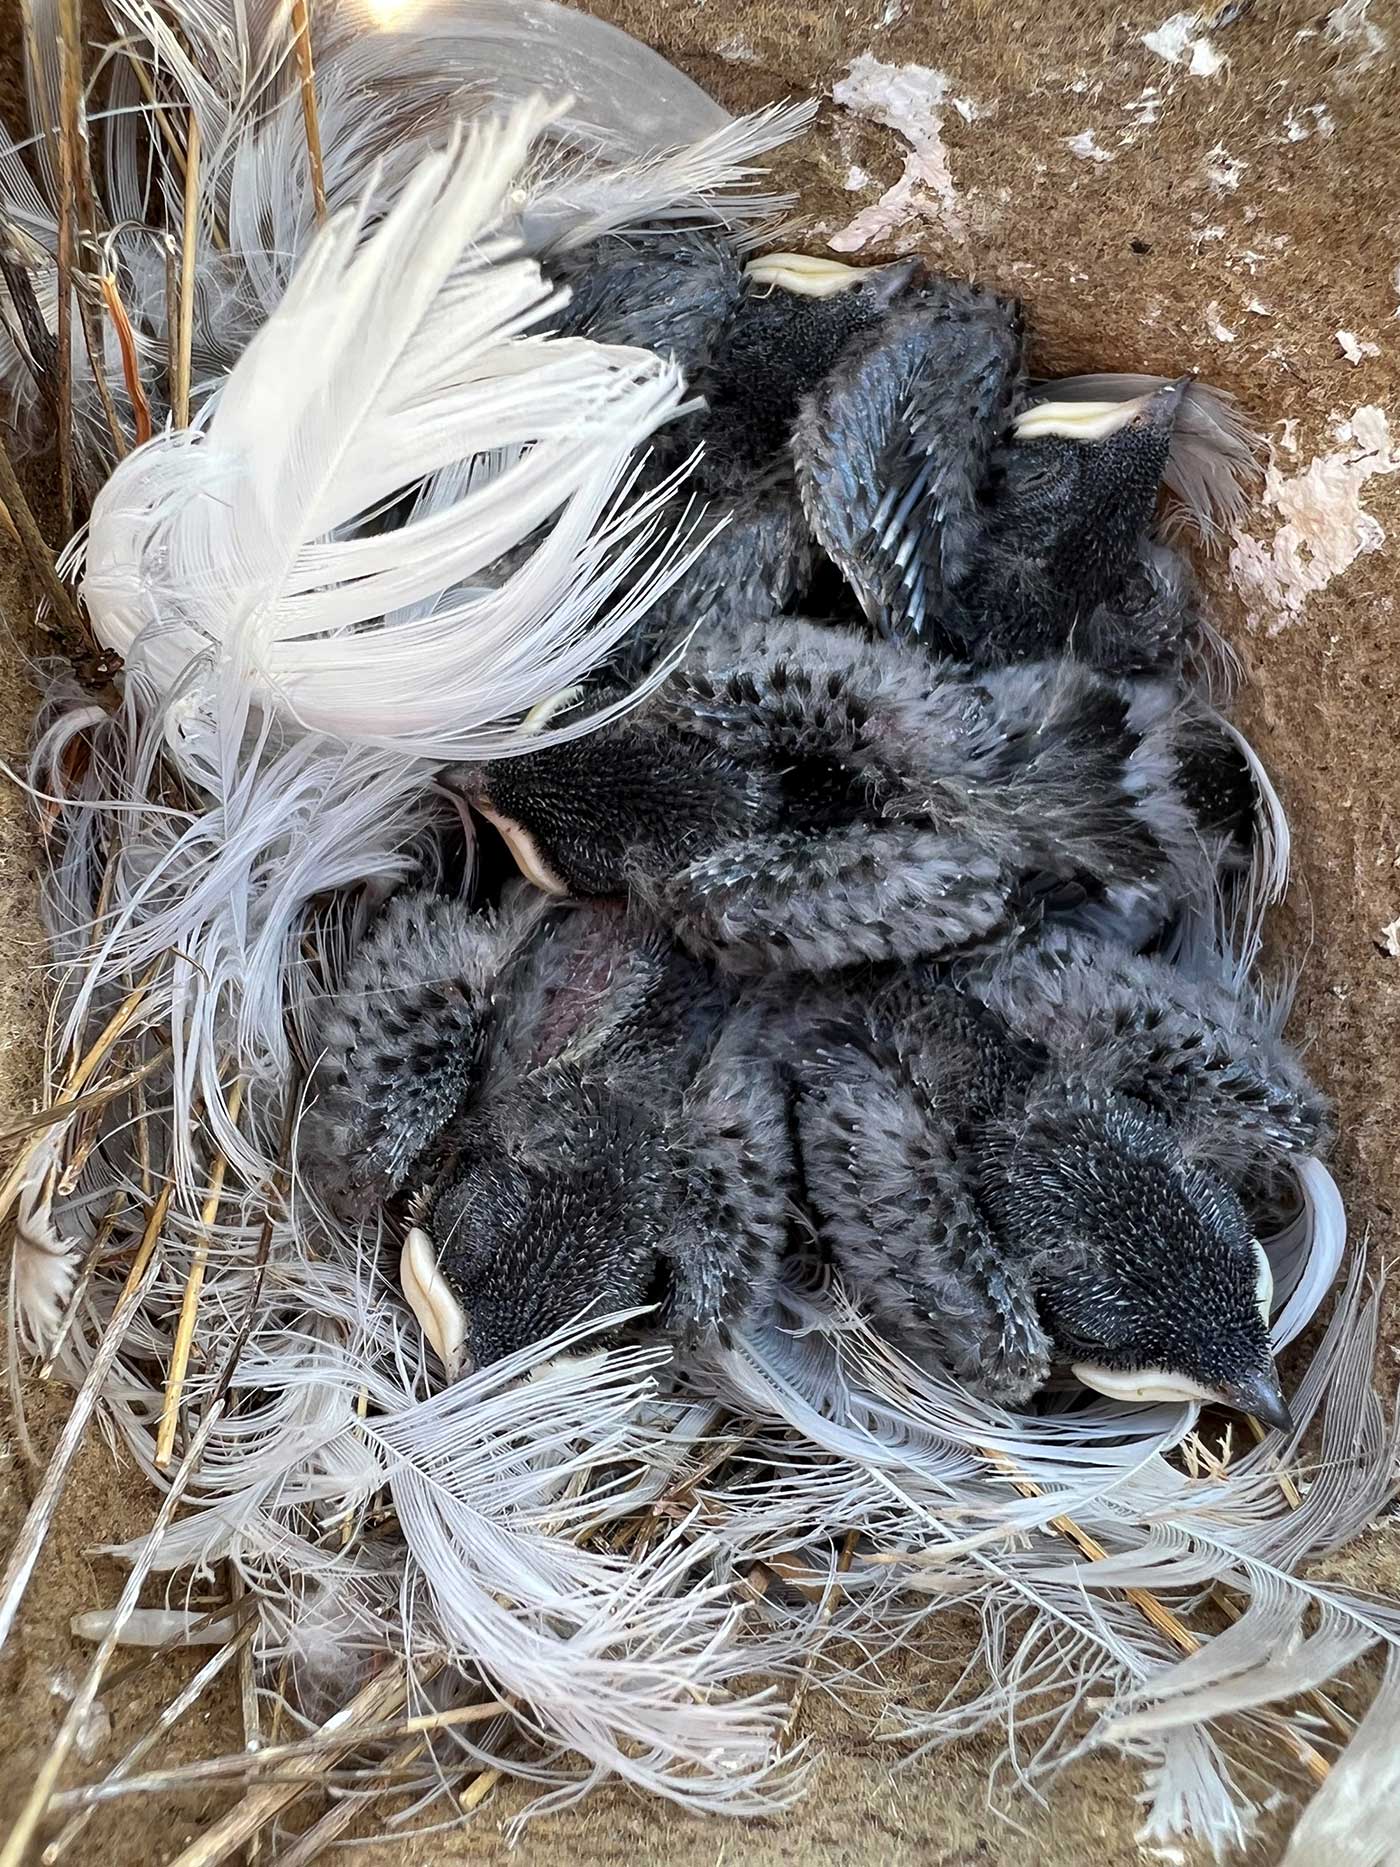 Tree Swallow chicks snuggled together in nest